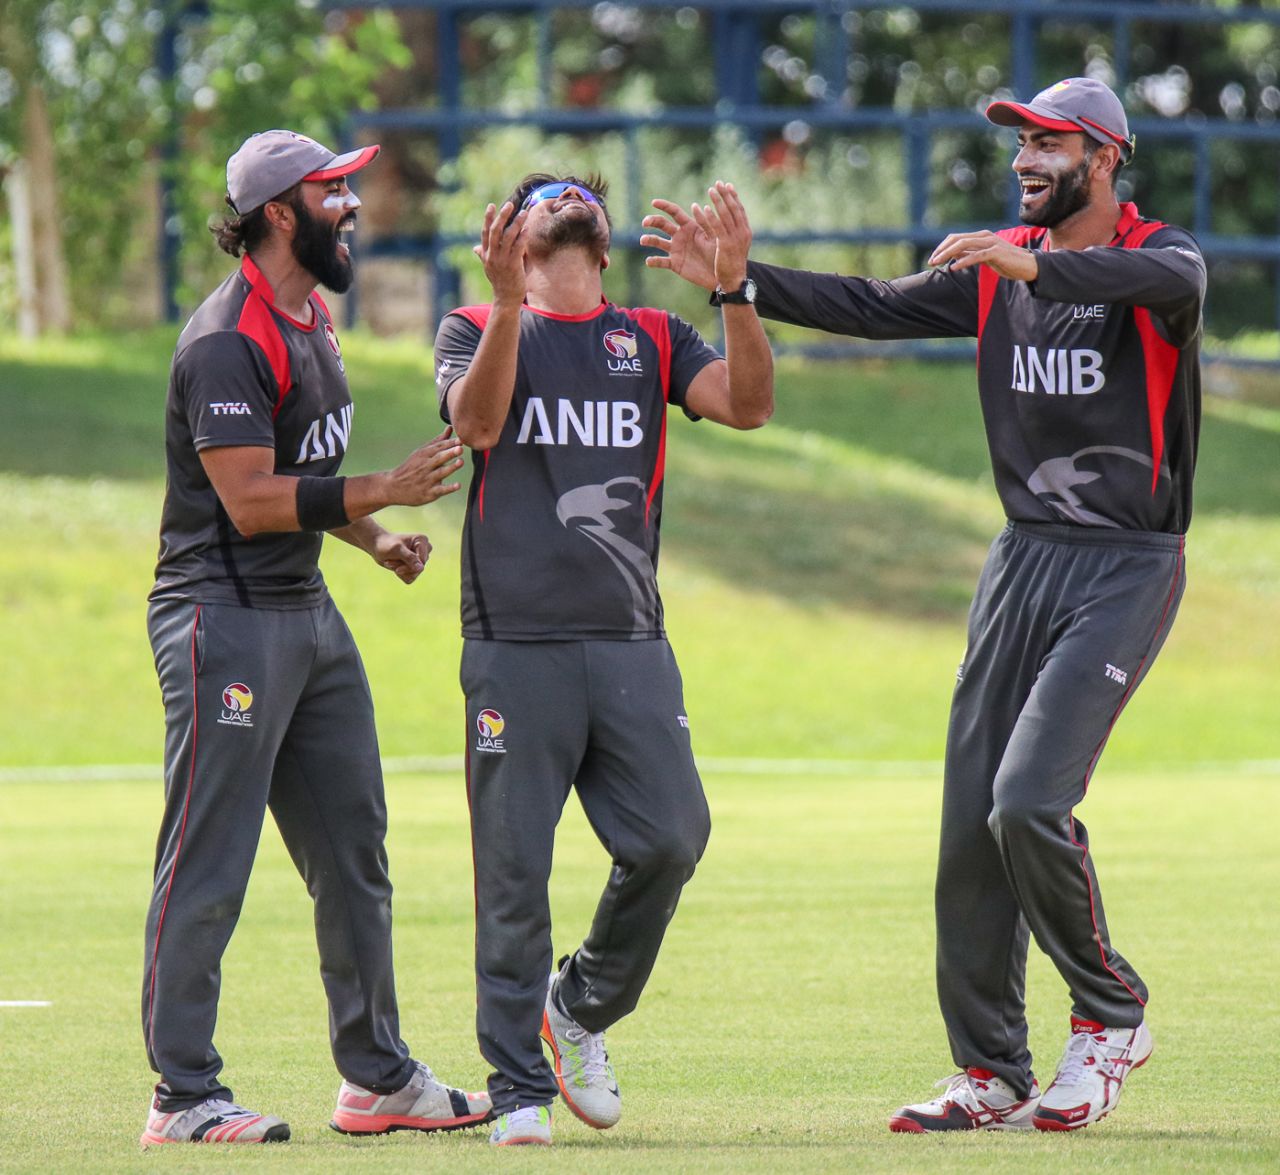 After a rocky start in the field, Imran Haider's prayers were answered with three wickets, Oman v UAE, ICC World Cricket League Division Two, Windhoek, February 12, 2018